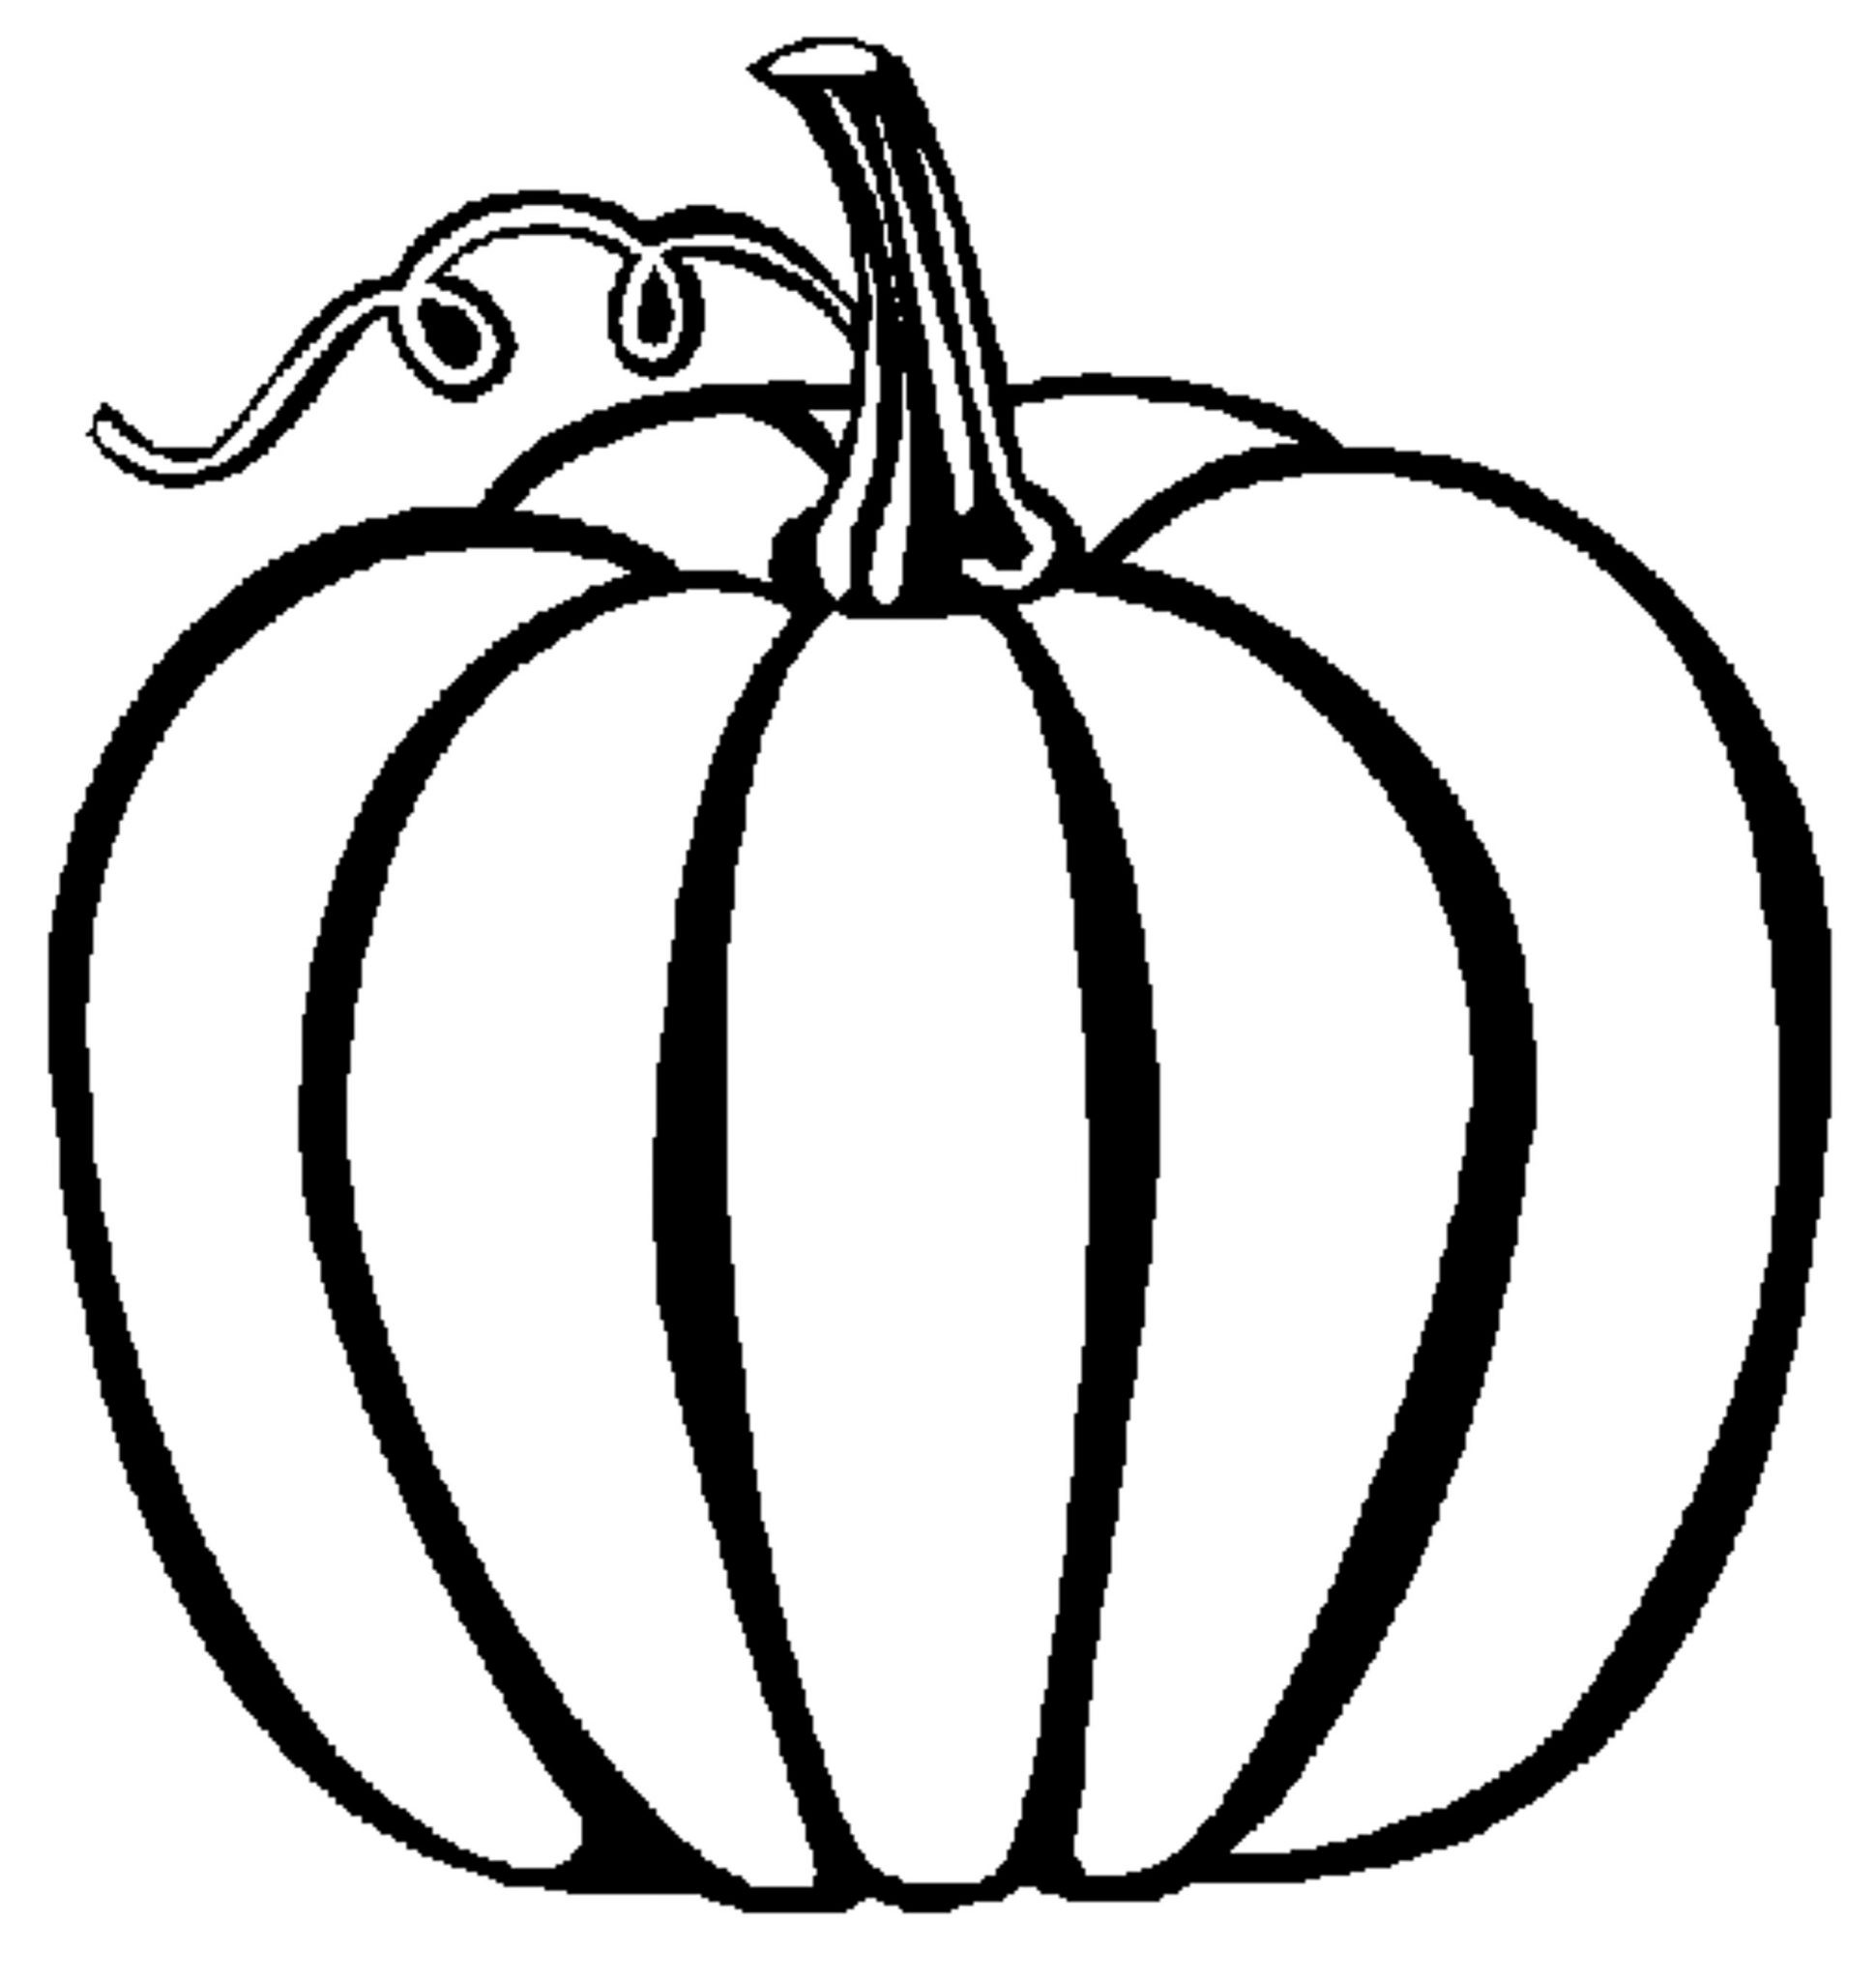 Pumpkin Coloring Pages For Toddlers
 Print & Download Pumpkin Coloring Pages and Benefits of